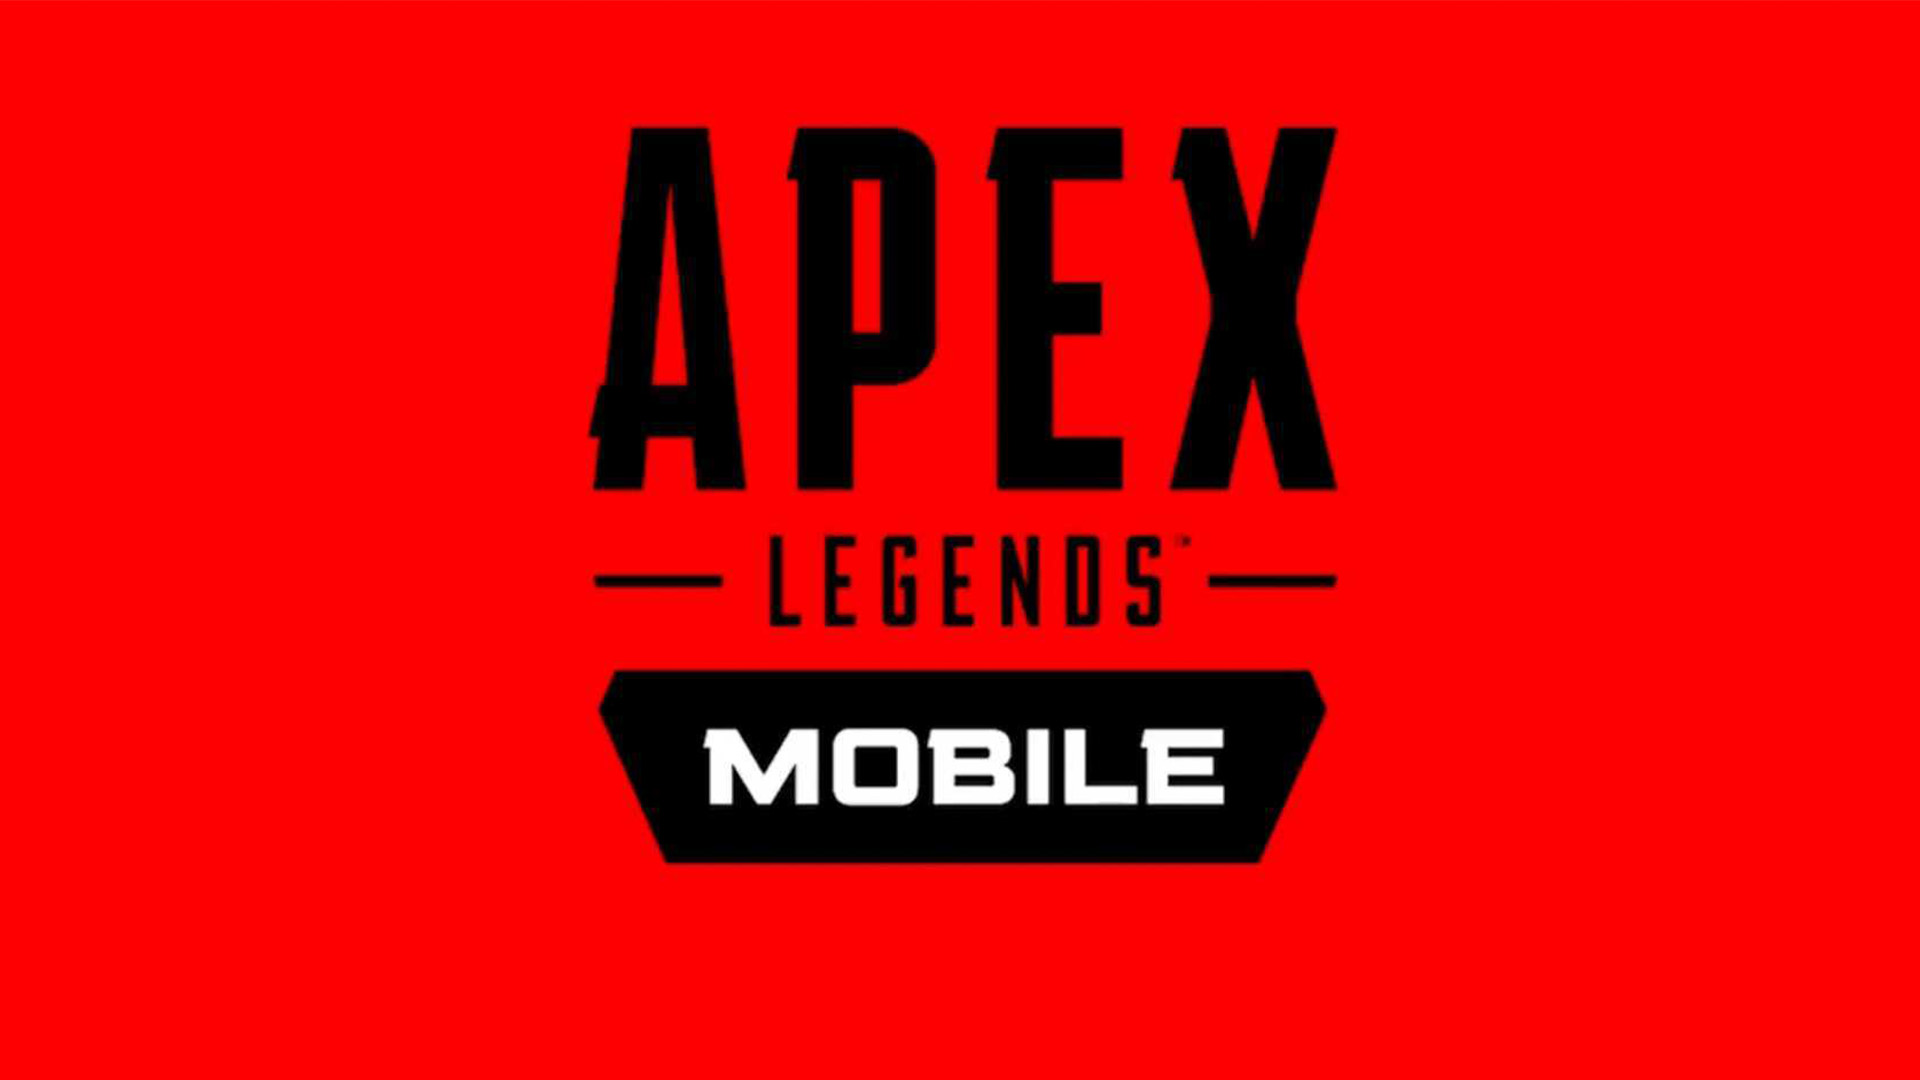 Does Apex Legends Mobile support crossplay?